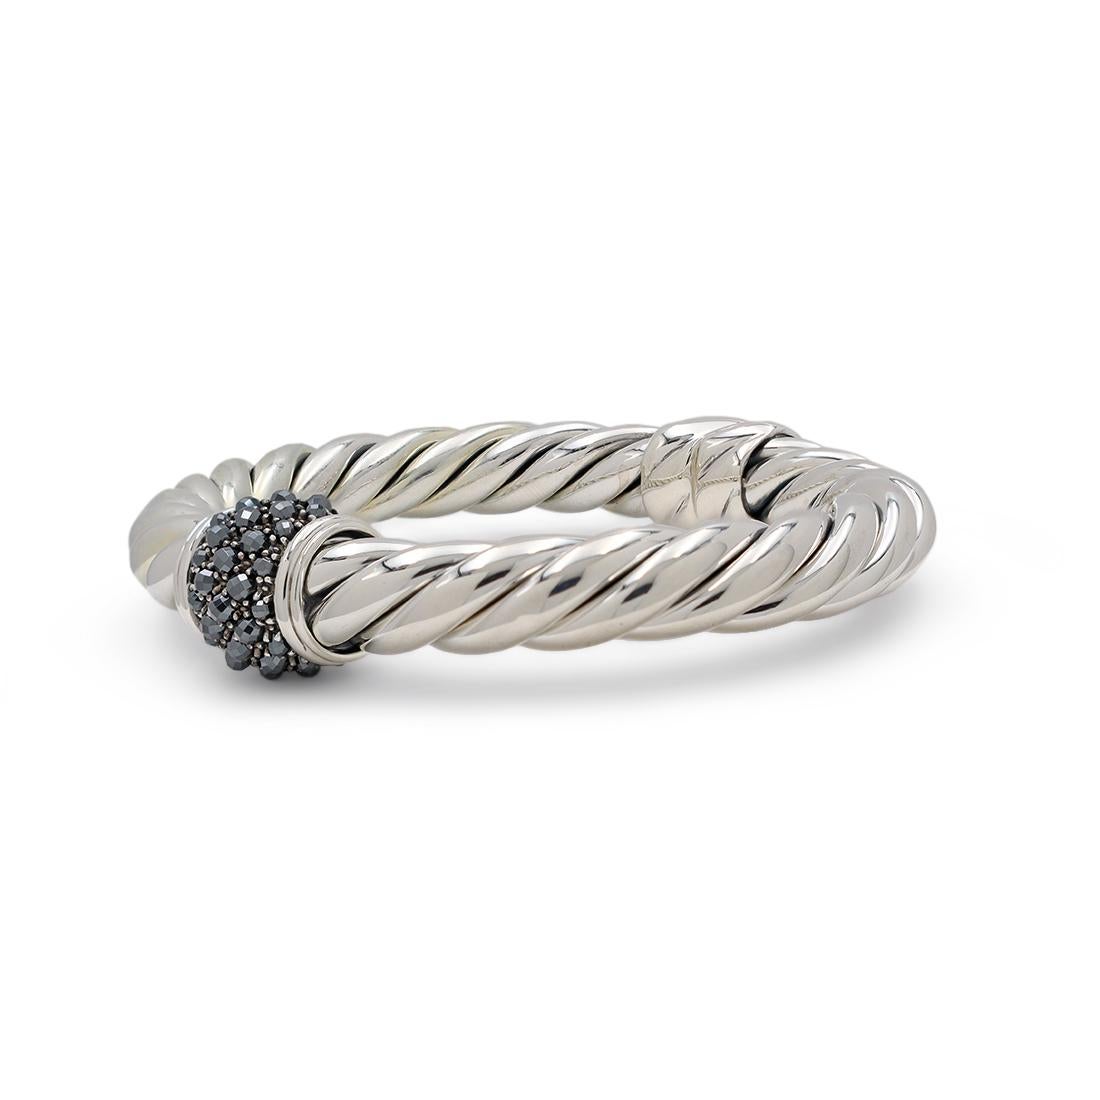 Authentic David Yurman ''Osetra'' bangle crafted in sterling silver. The bracelet is set with 37 faceted round hematites. Size 6 US, 15 EU. The bangle measures 9mm wide. Signed D.Y, 925. The bangle is not presented with the original box or papers.